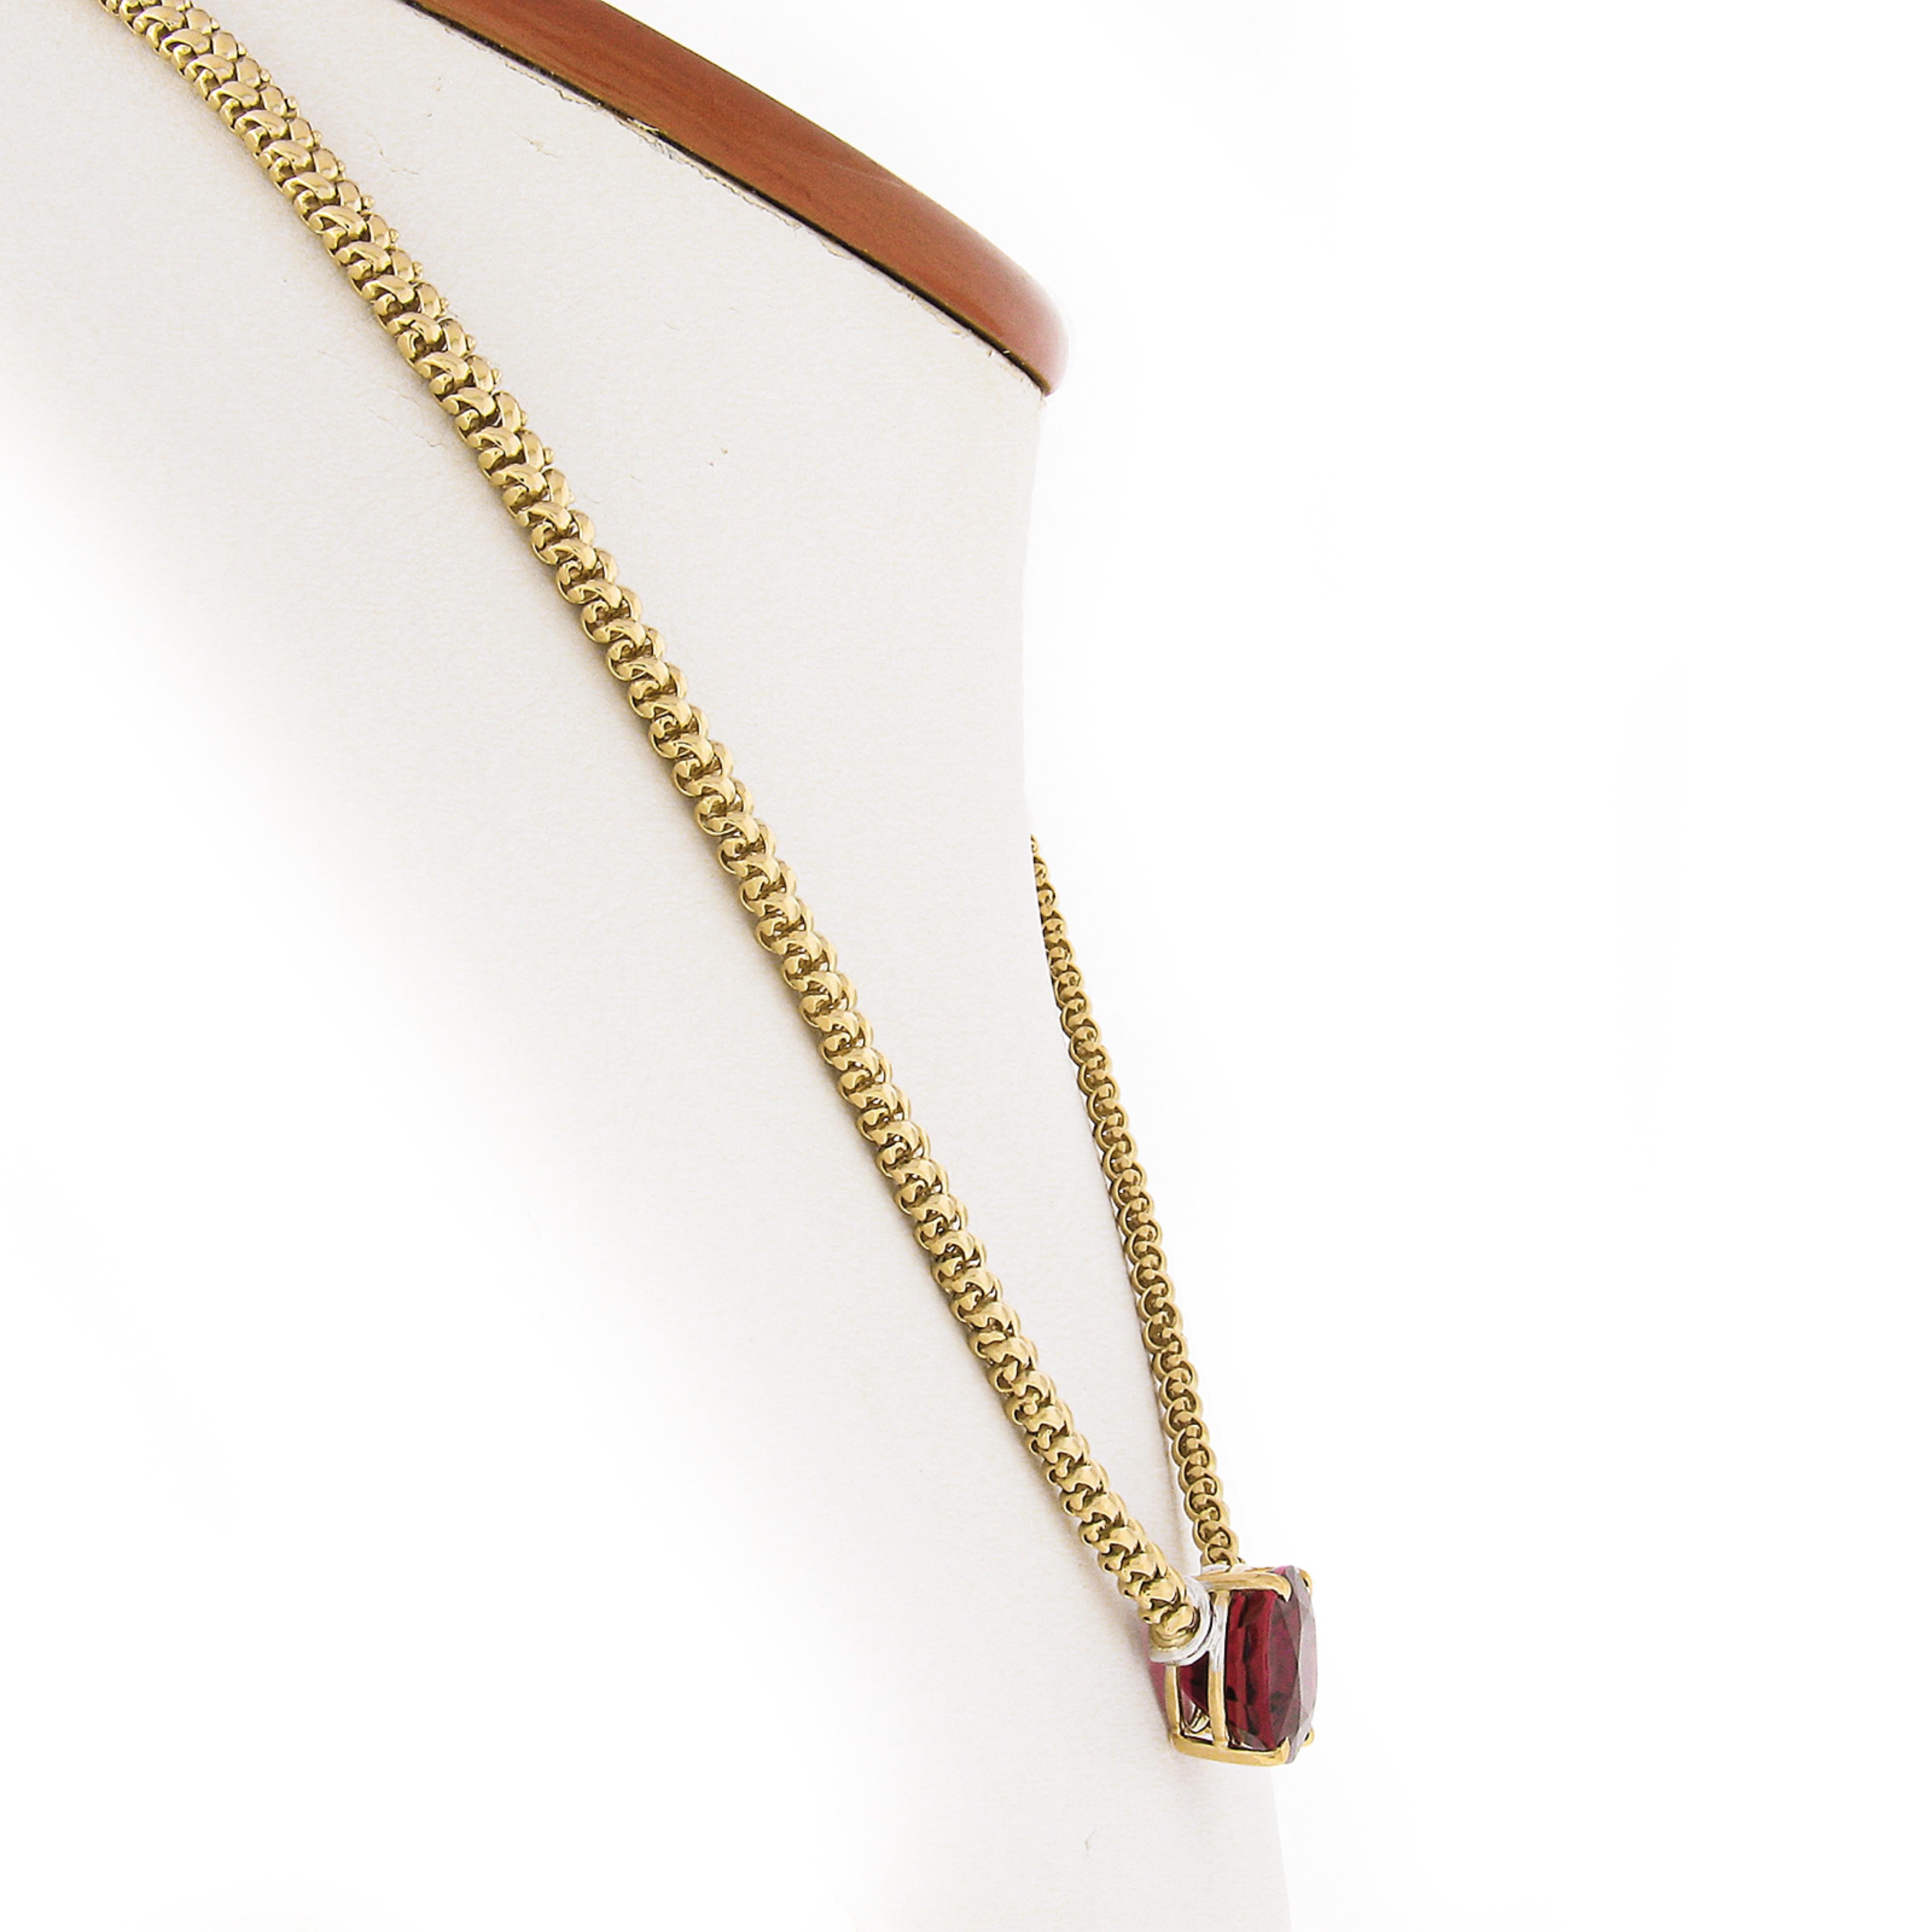 Oval Cut 18k Two Tone Gold 12.82 Carat GIA Large Oval Red Rubellite Tourmaline Necklace For Sale